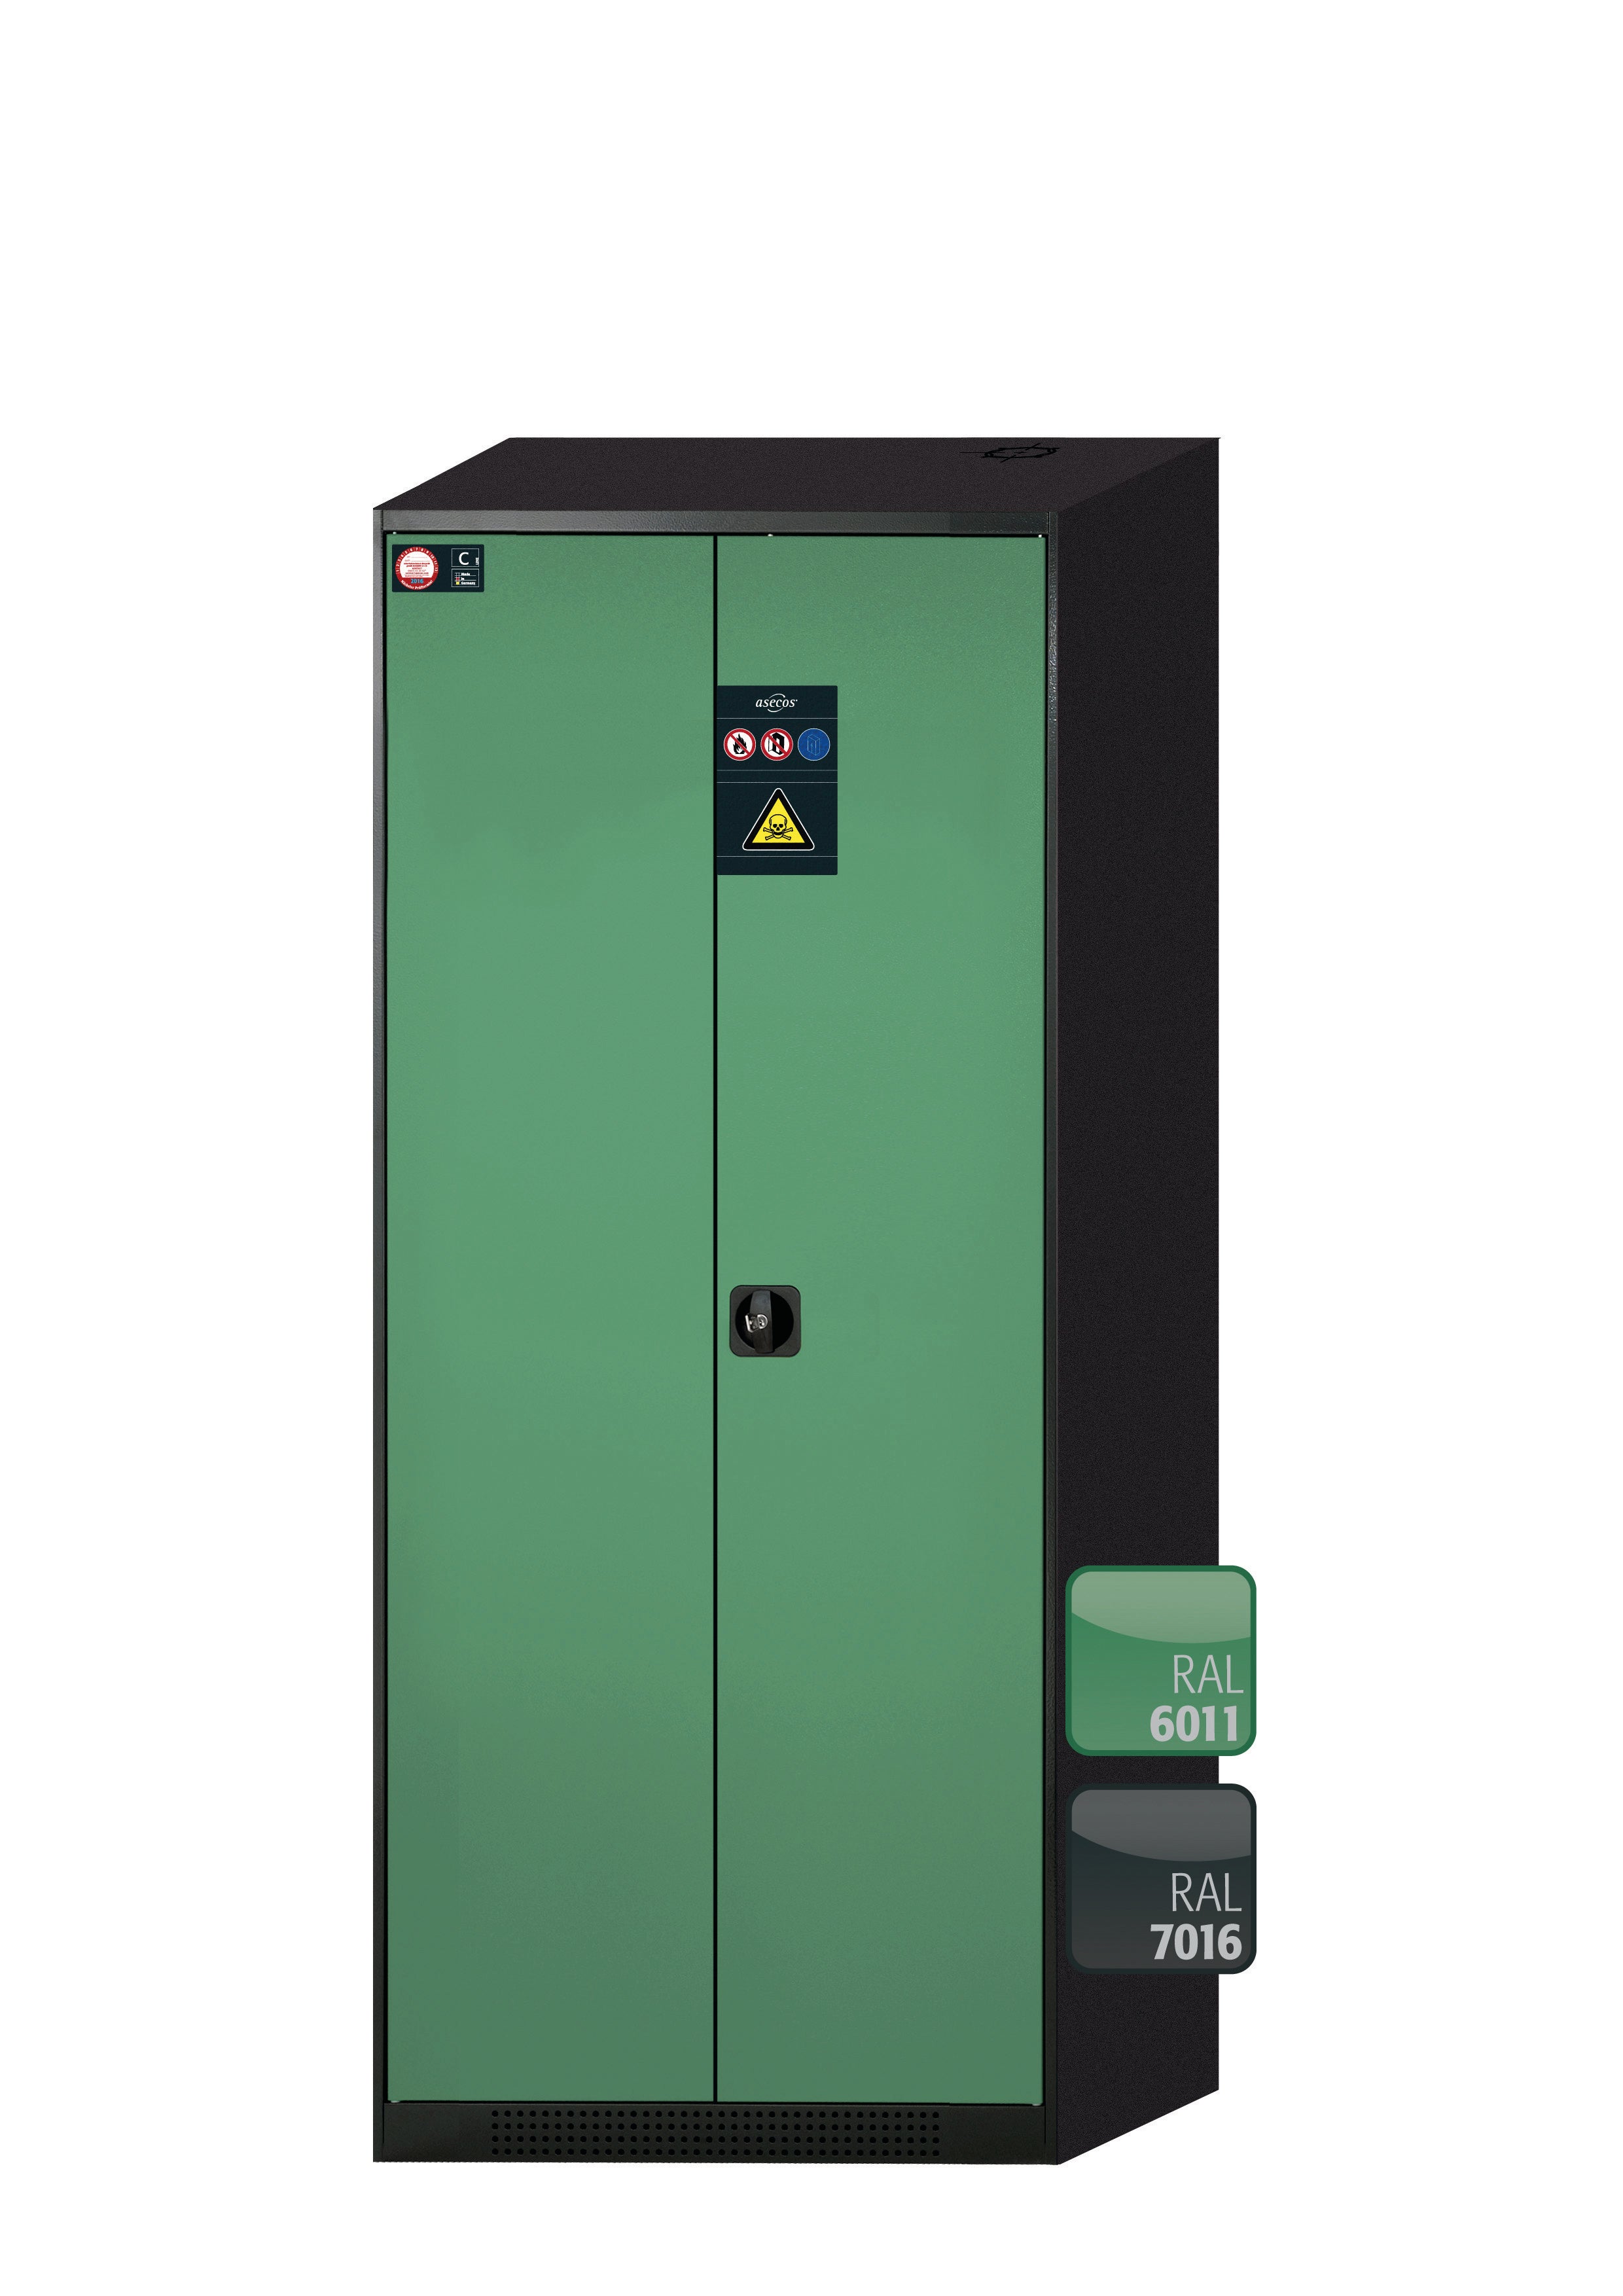 Chemical cabinet CS-CLASSIC model CS.195.081 in reseda green RAL 6011 with 4x AbZ pull-out shelves (sheet steel/polypropylene)